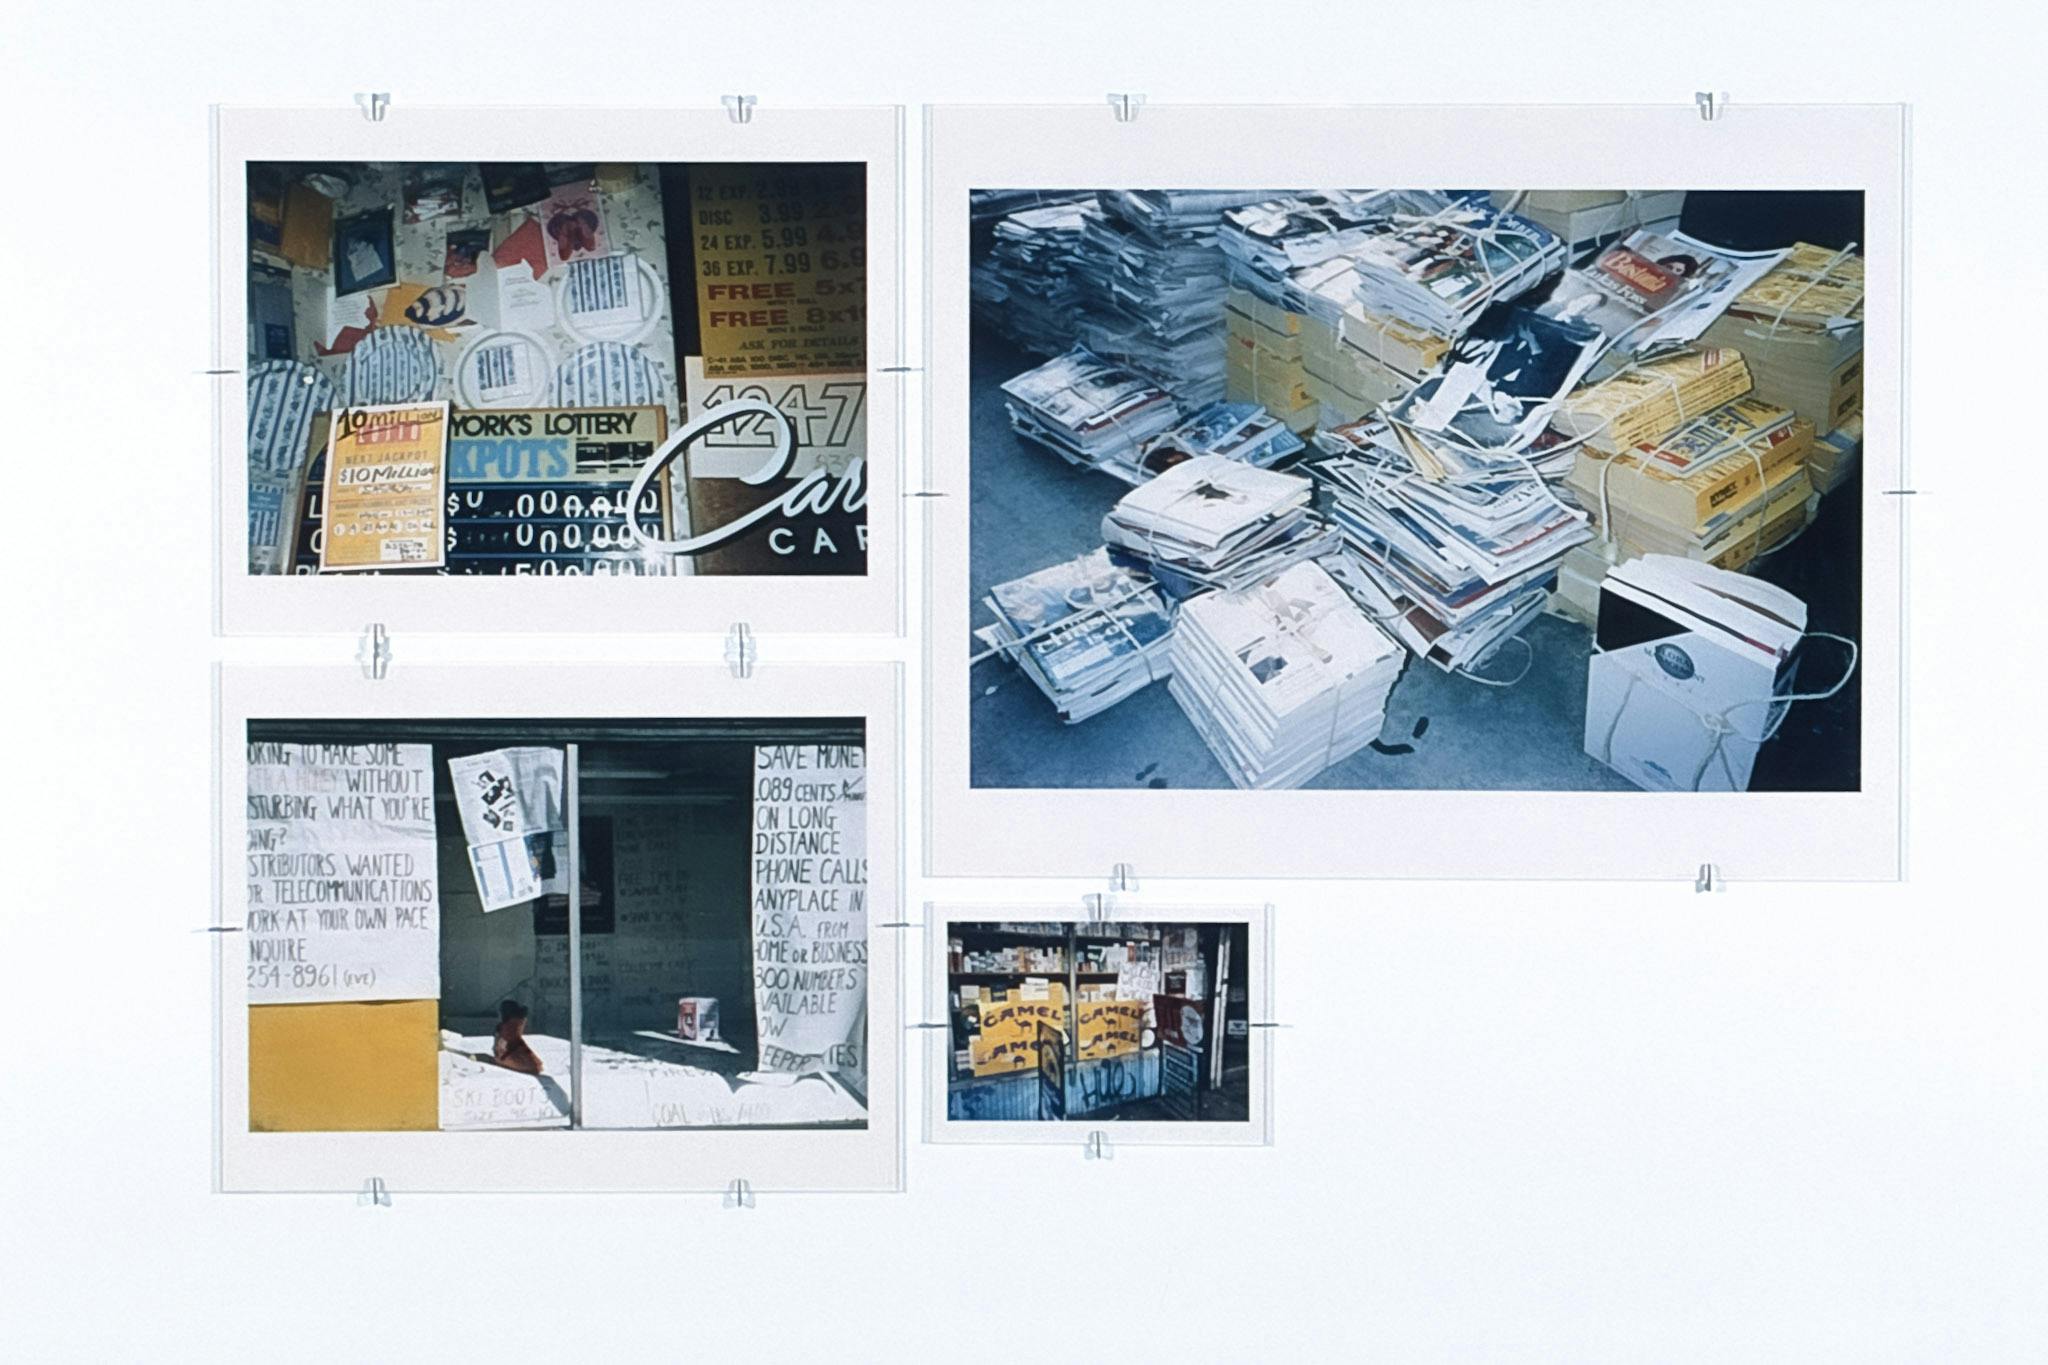 Four coloured photographs of various sizes are displayed on a gallery wall. All images depict paper. One photograph shows signs covering the wall, and the other shows piles of books to be recycled.